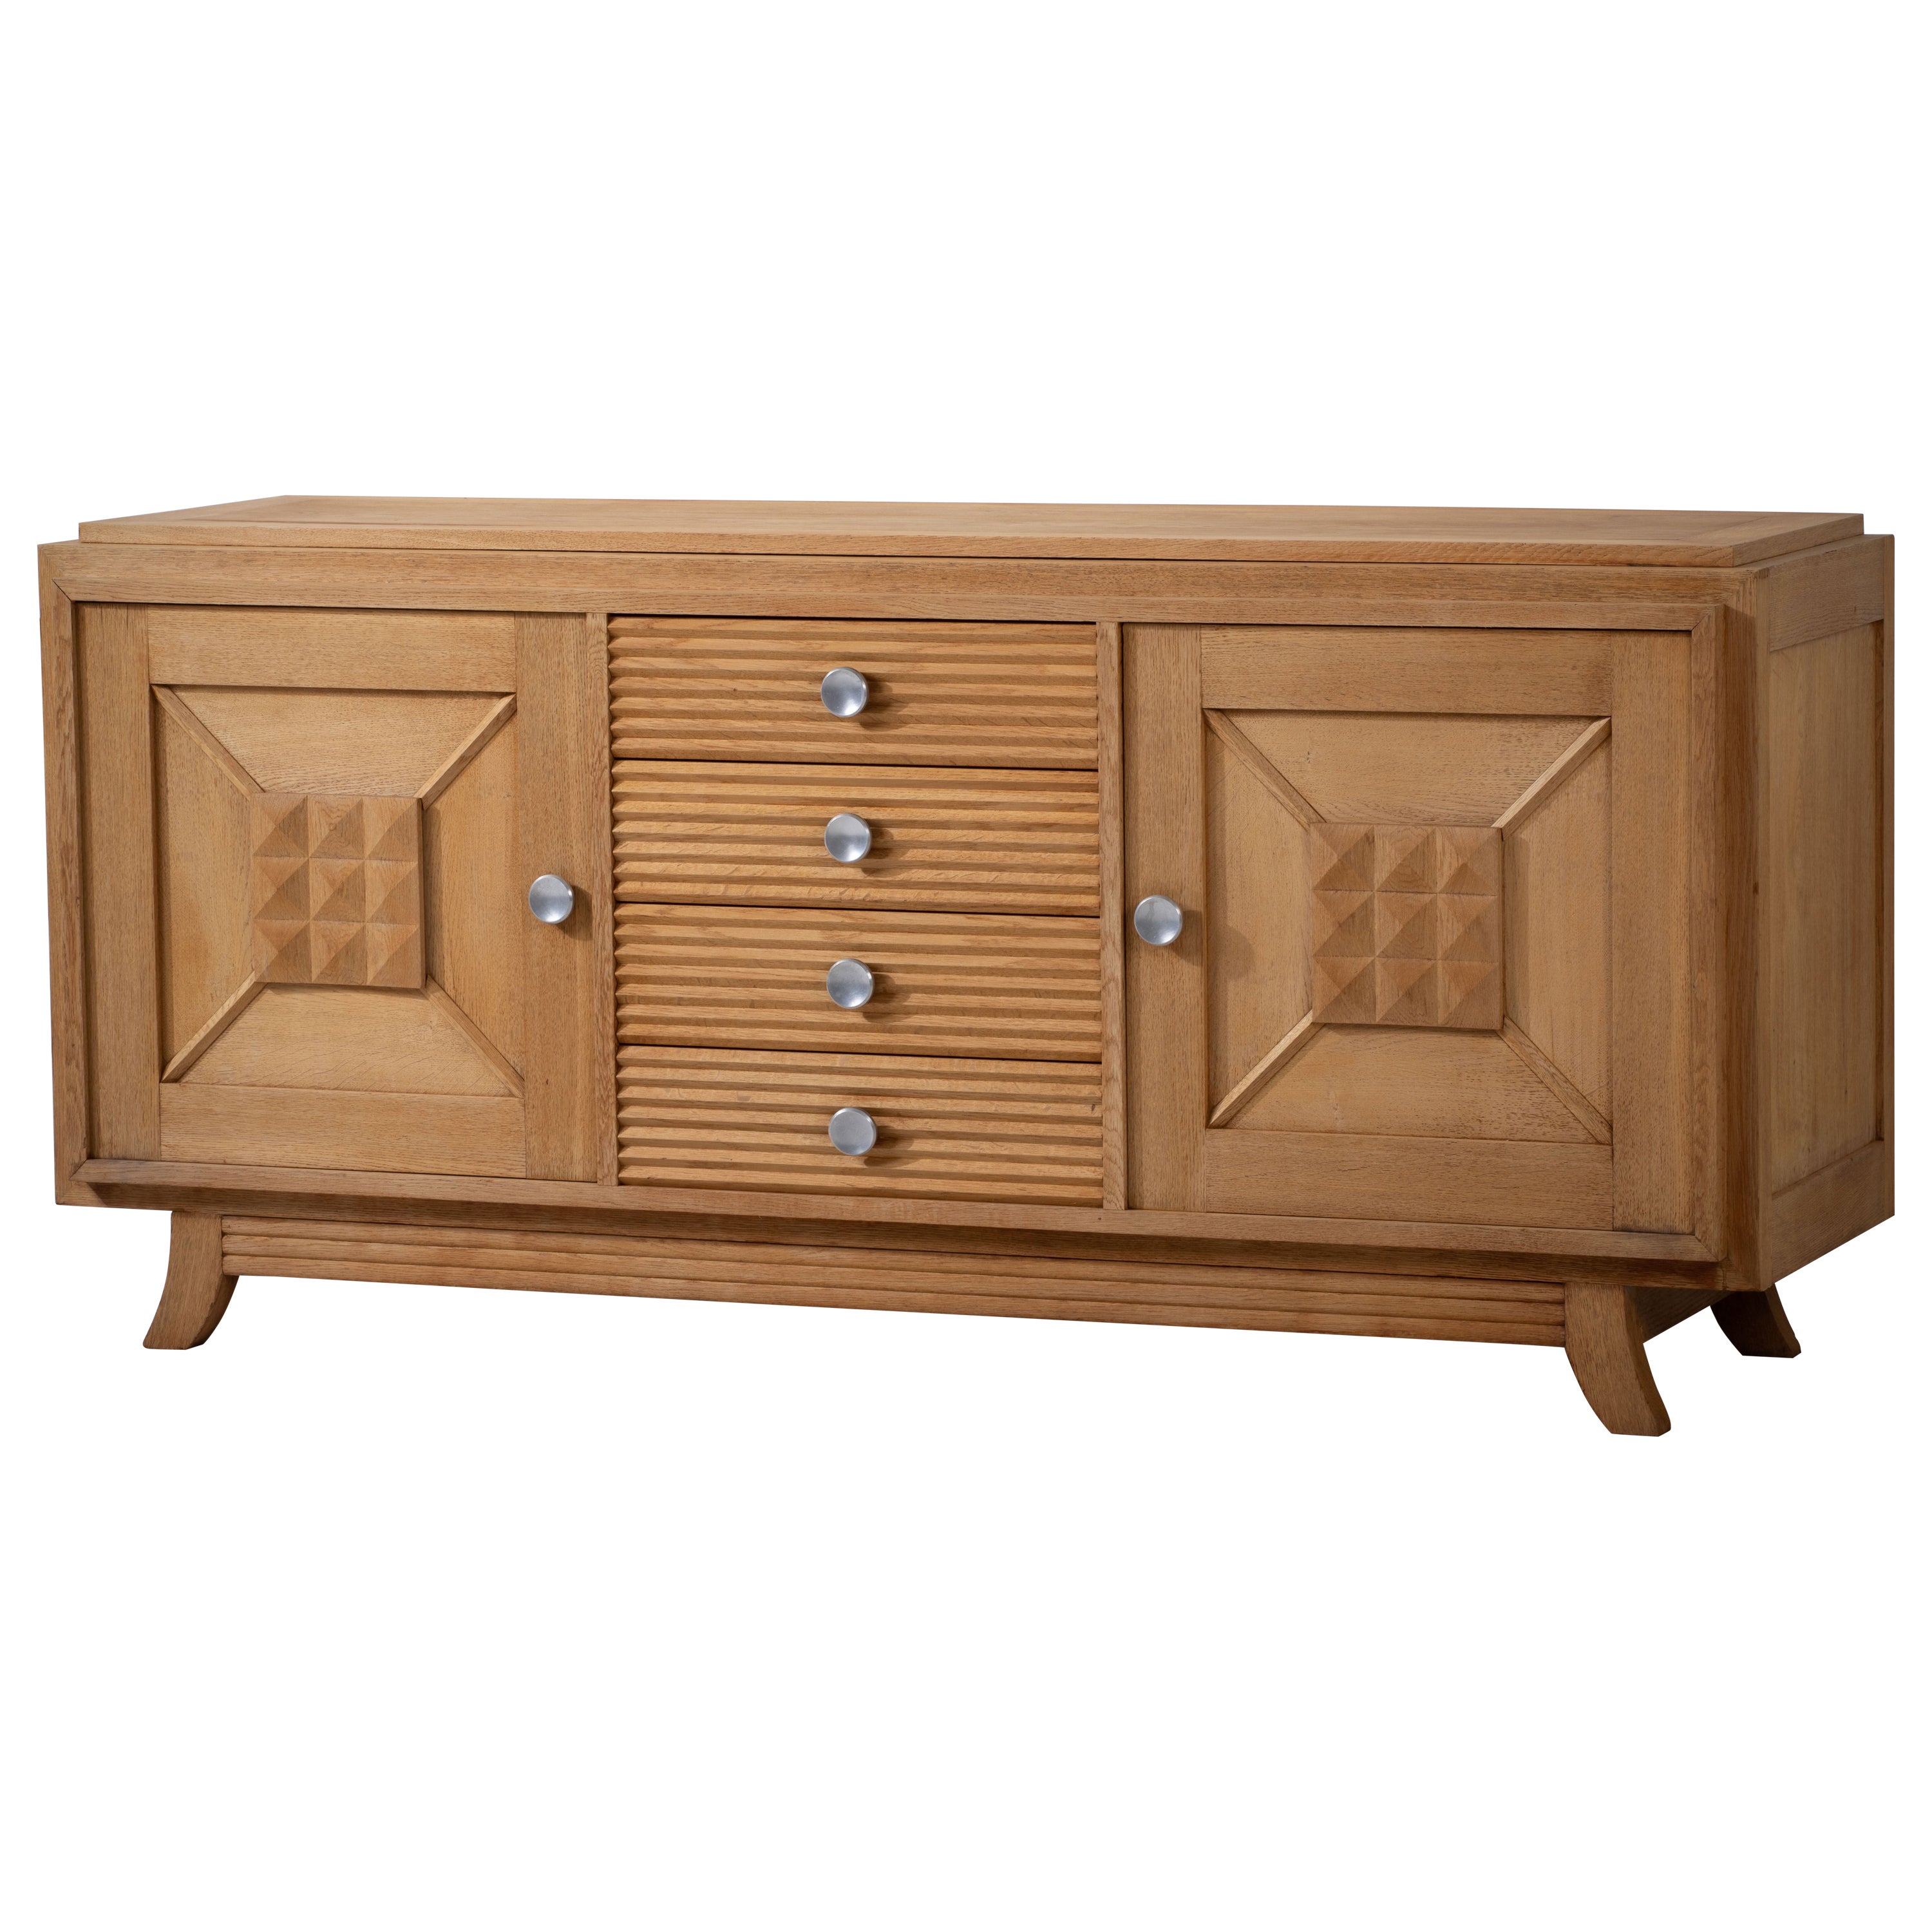 Solid Oak Credenza with Graphic Details, France, 1940s For Sale